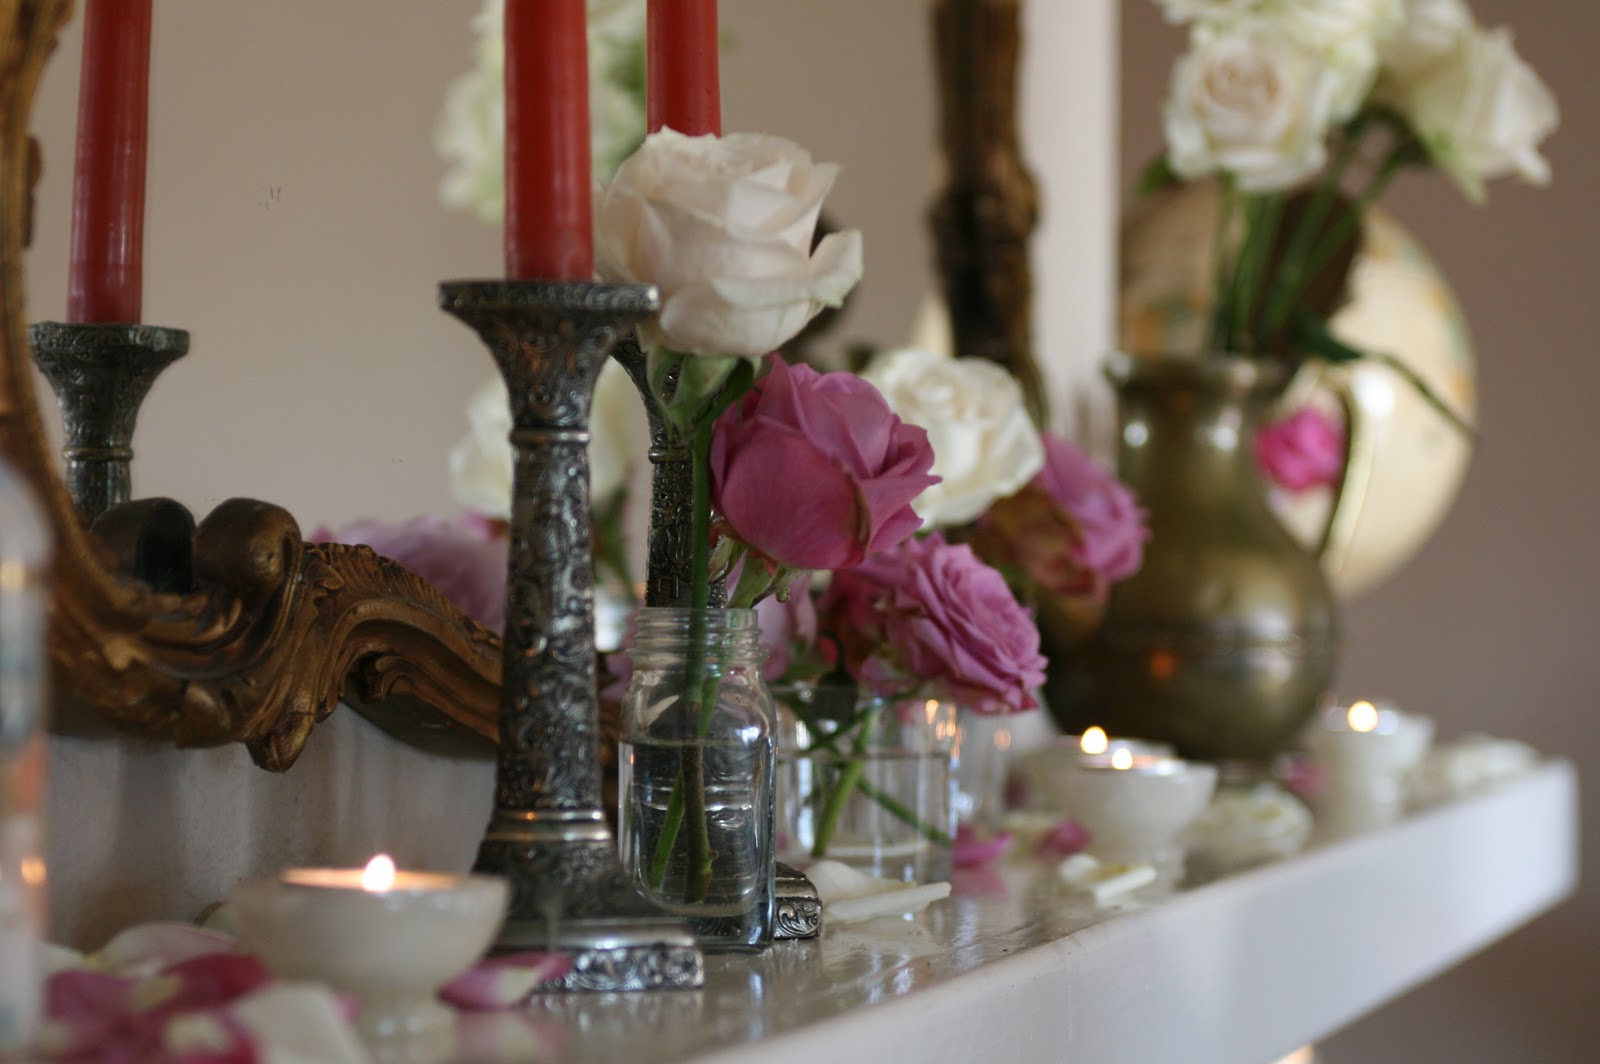 Candles and flowers on a hearth